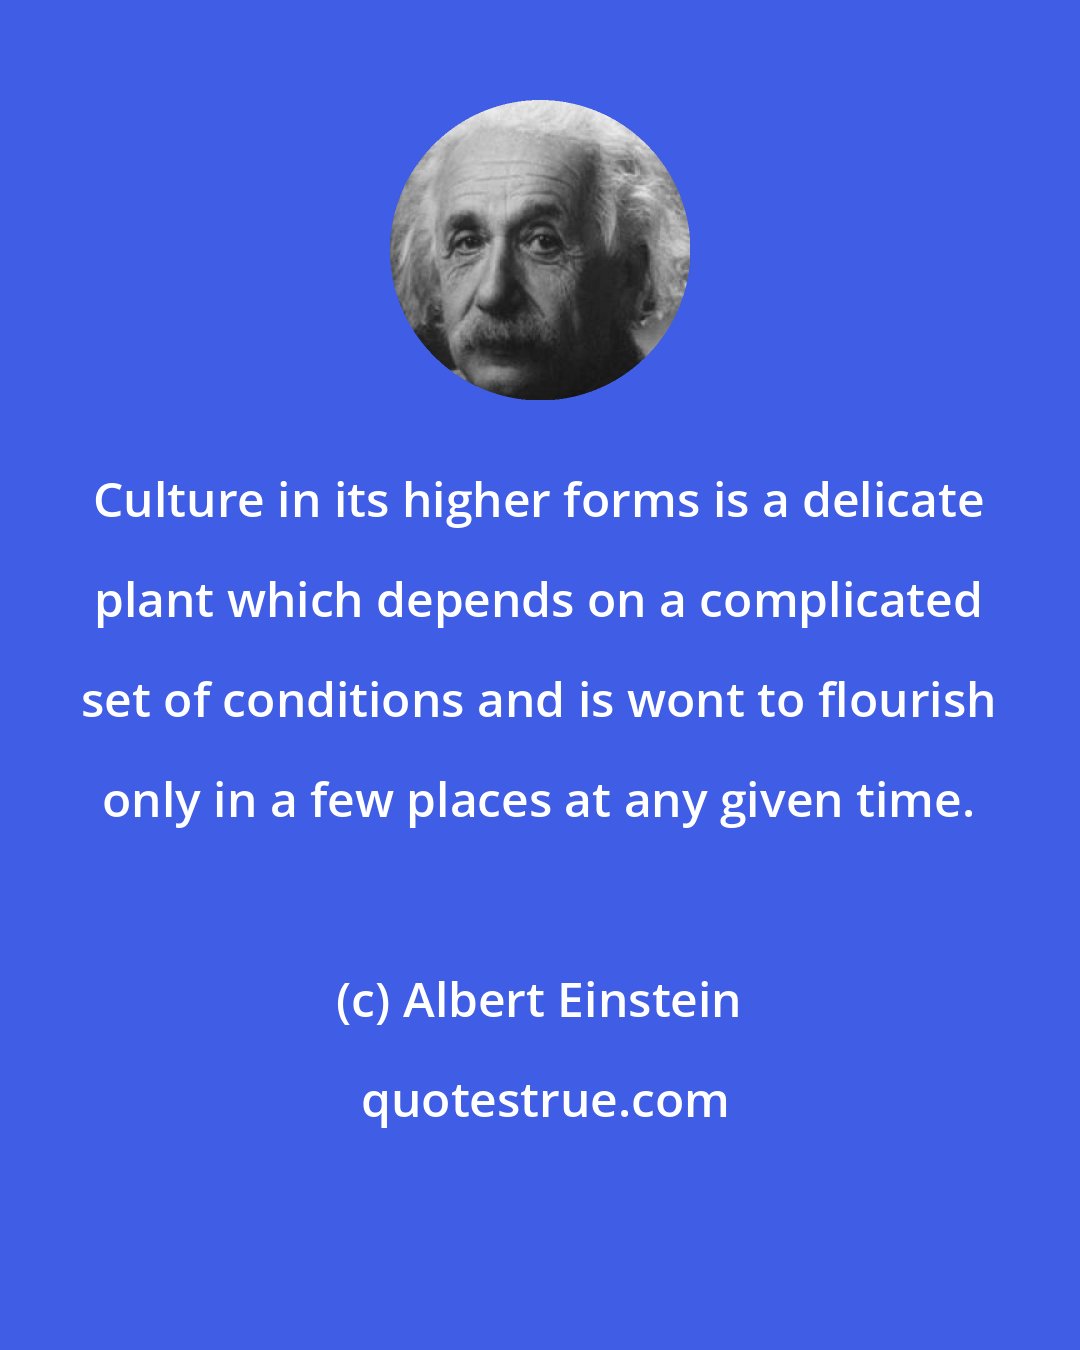 Albert Einstein: Culture in its higher forms is a delicate plant which depends on a complicated set of conditions and is wont to flourish only in a few places at any given time.